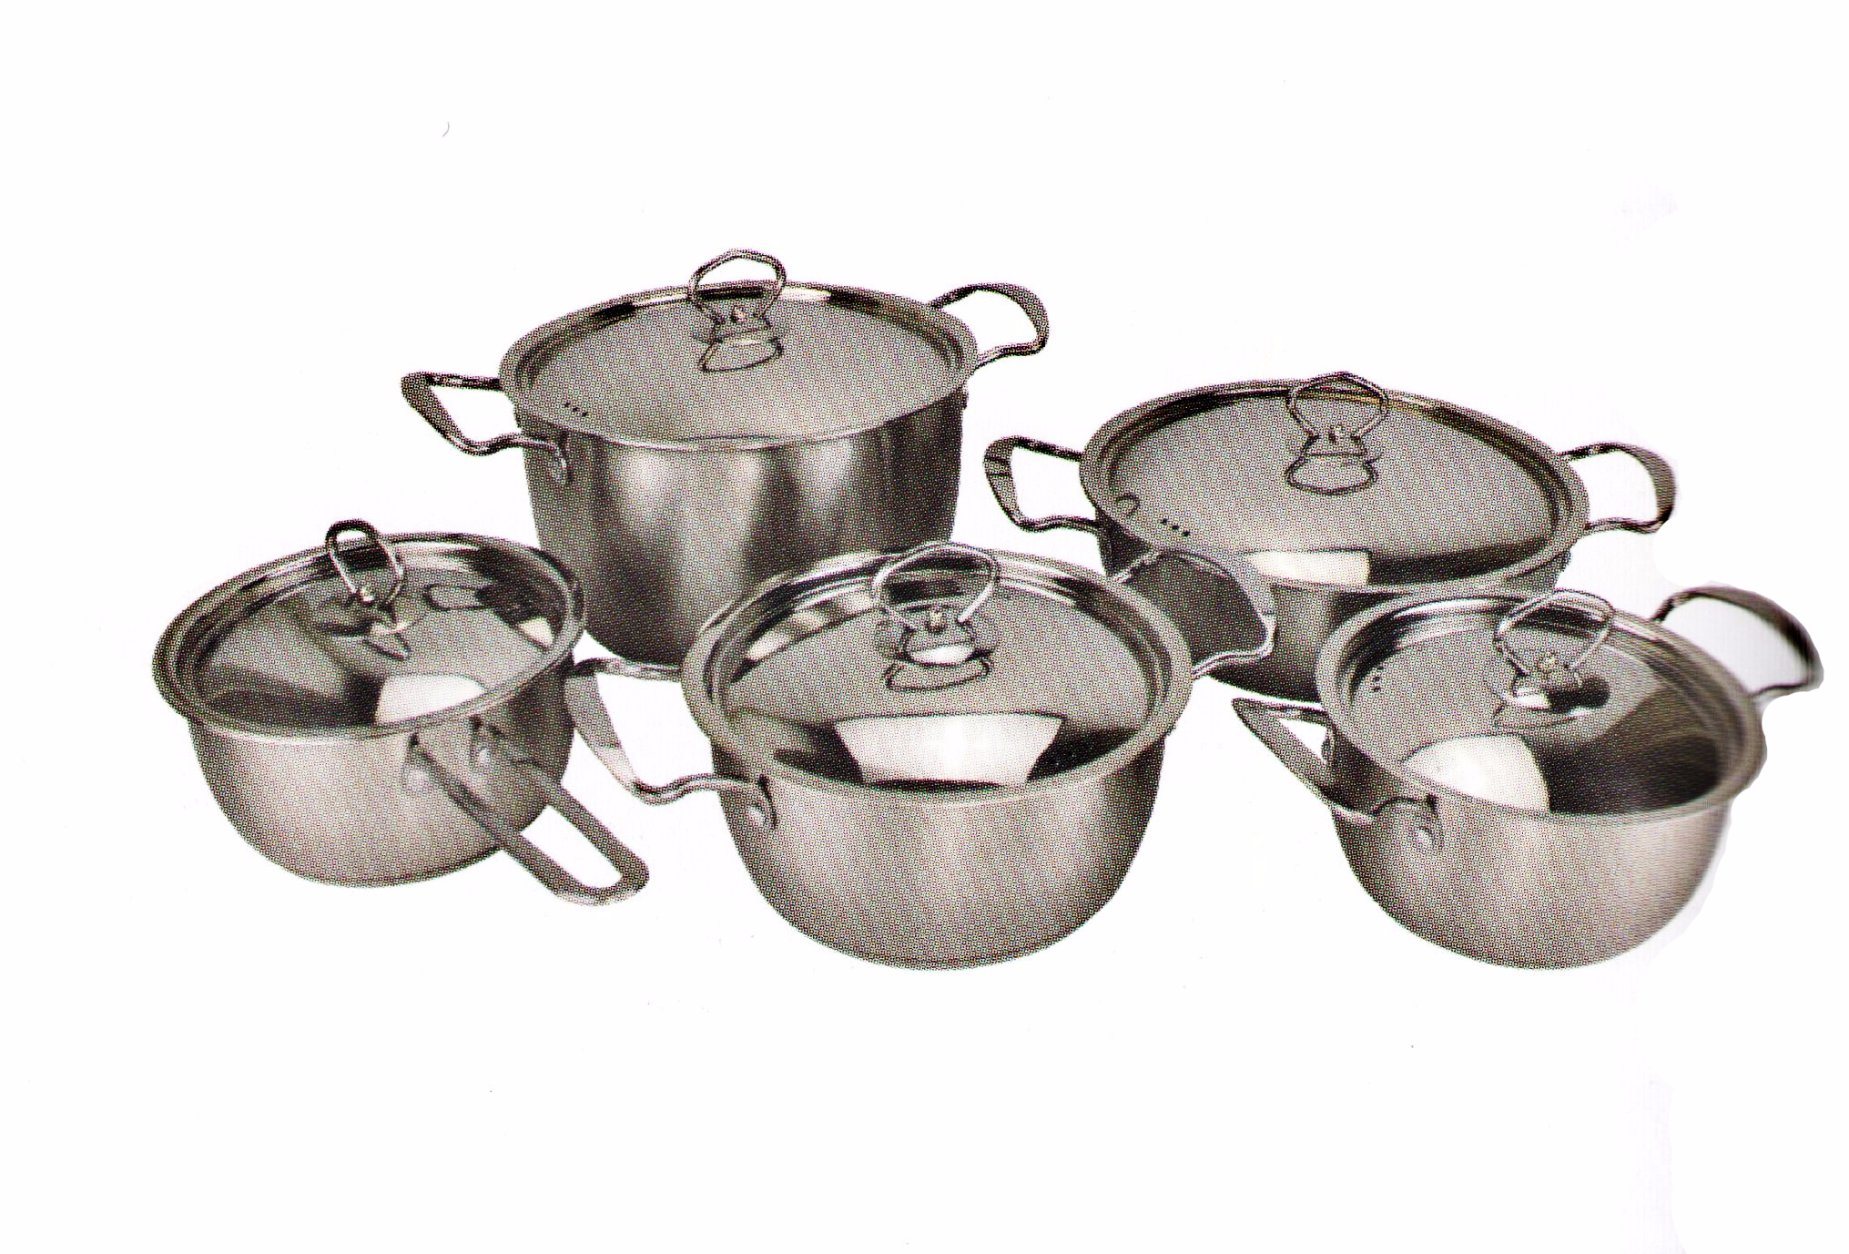 2017 High quality Plastic Food Warmer Container -
 Home Appliance 10PCS Stainless Steel Cooking Pot and Frying Pan PP008 – Long Prosper